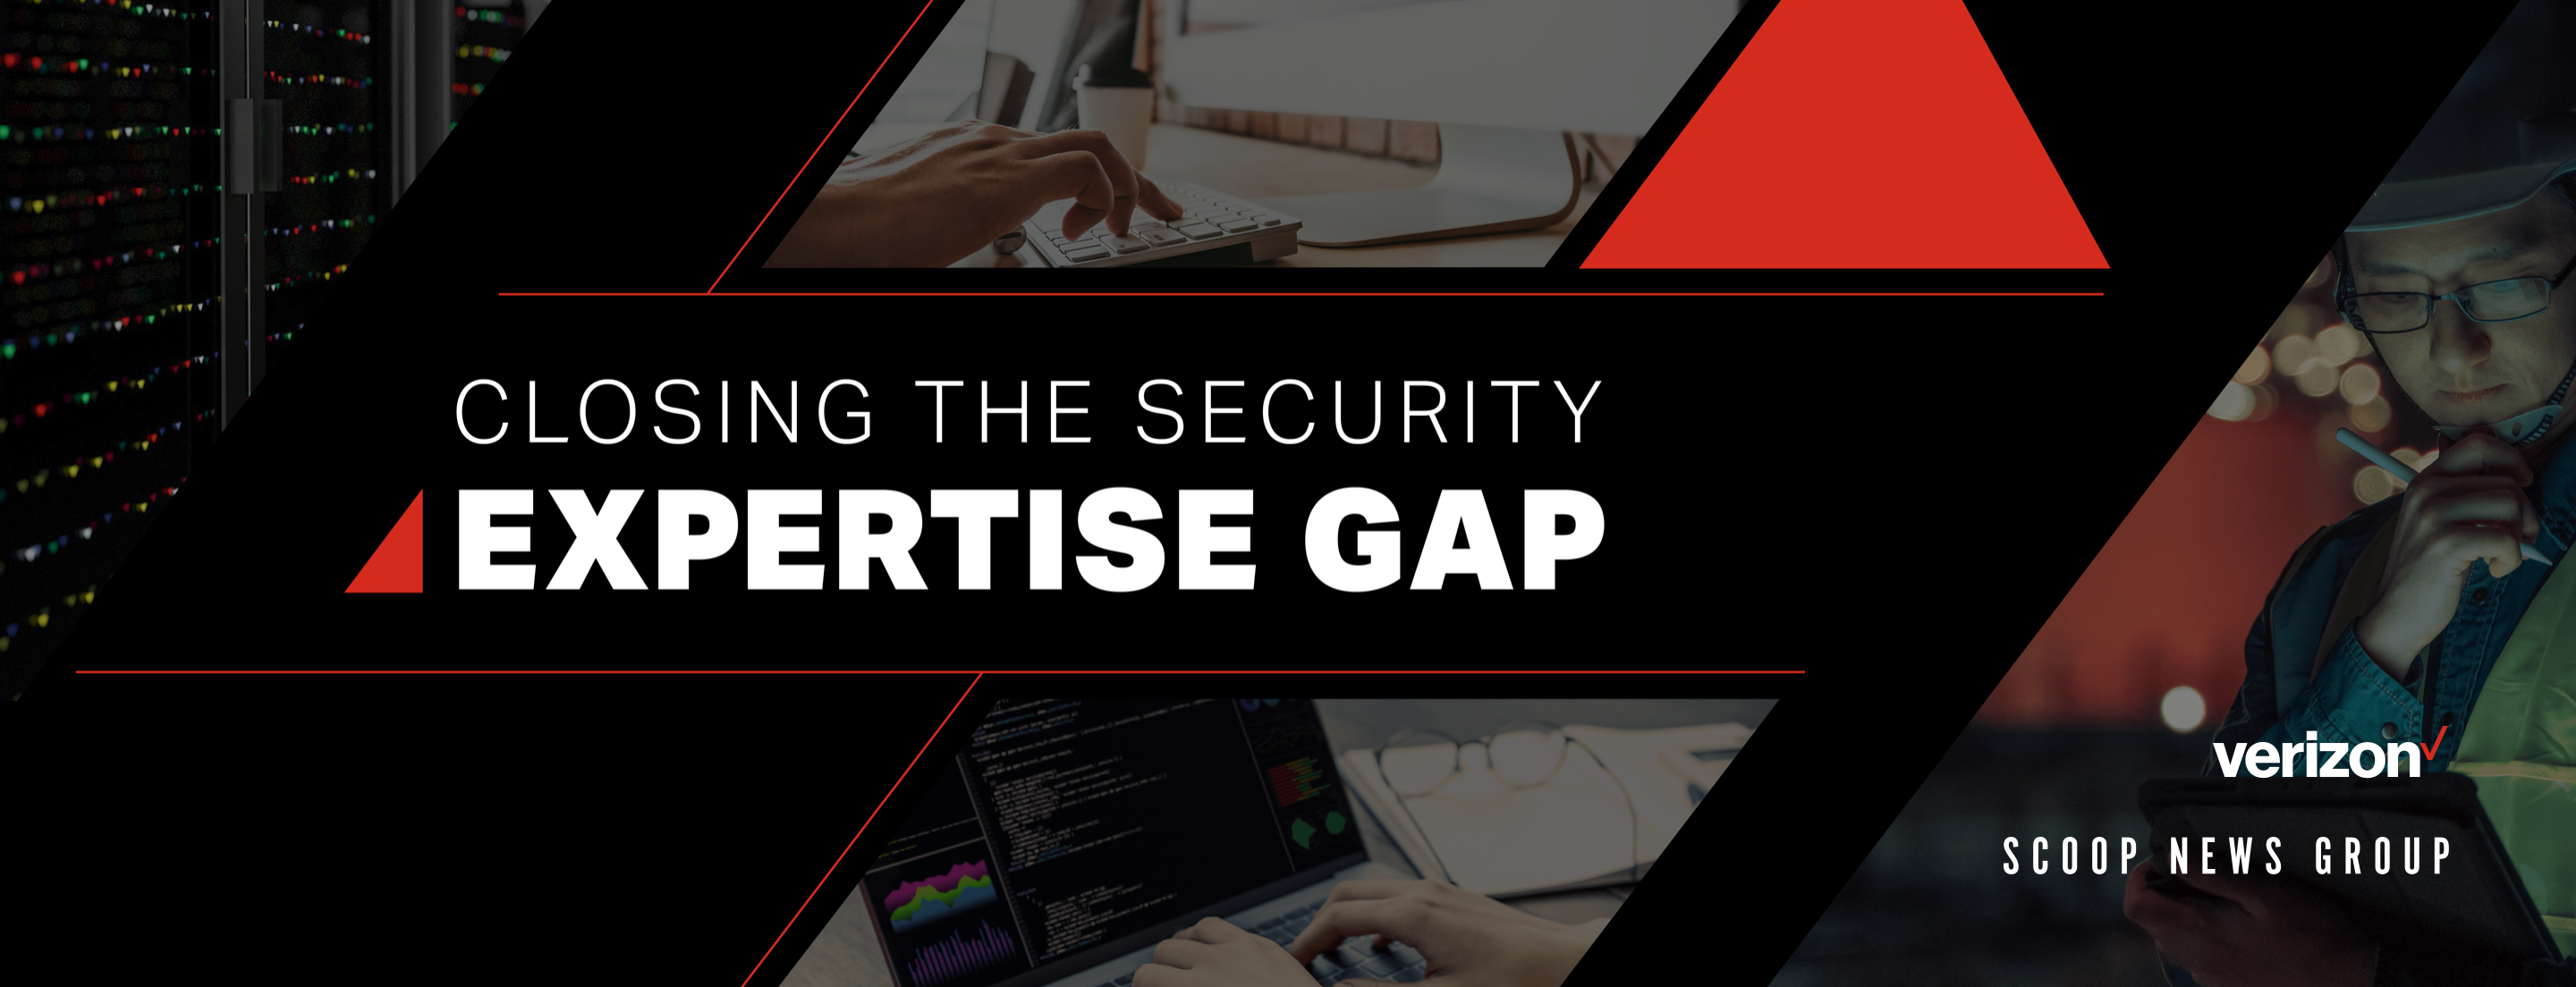 Closing the Security Expertise Gap